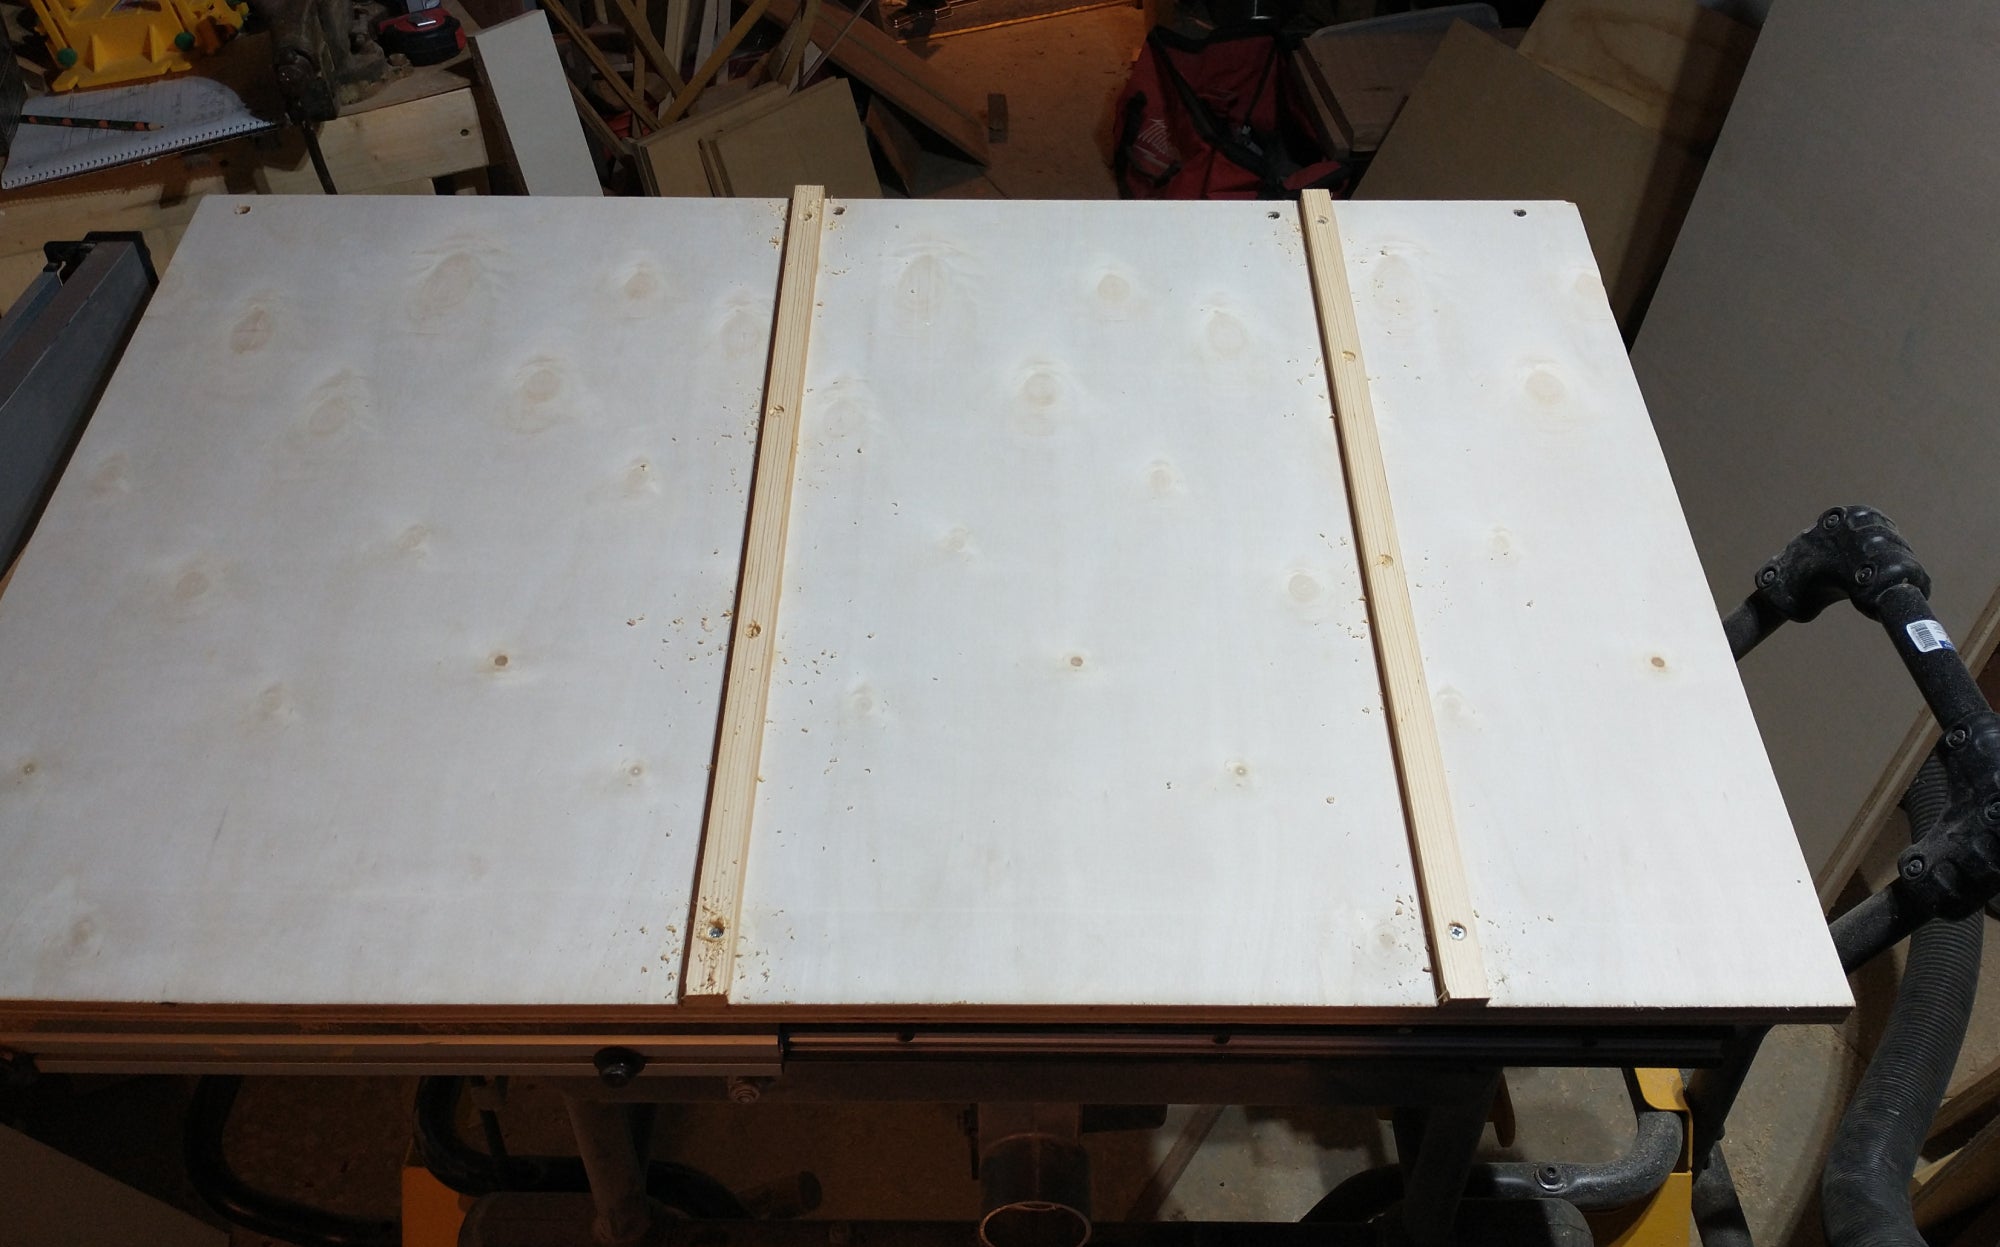 The underside of a DIY crosscut sled, showing the runners that go into the table saw's miter slots.